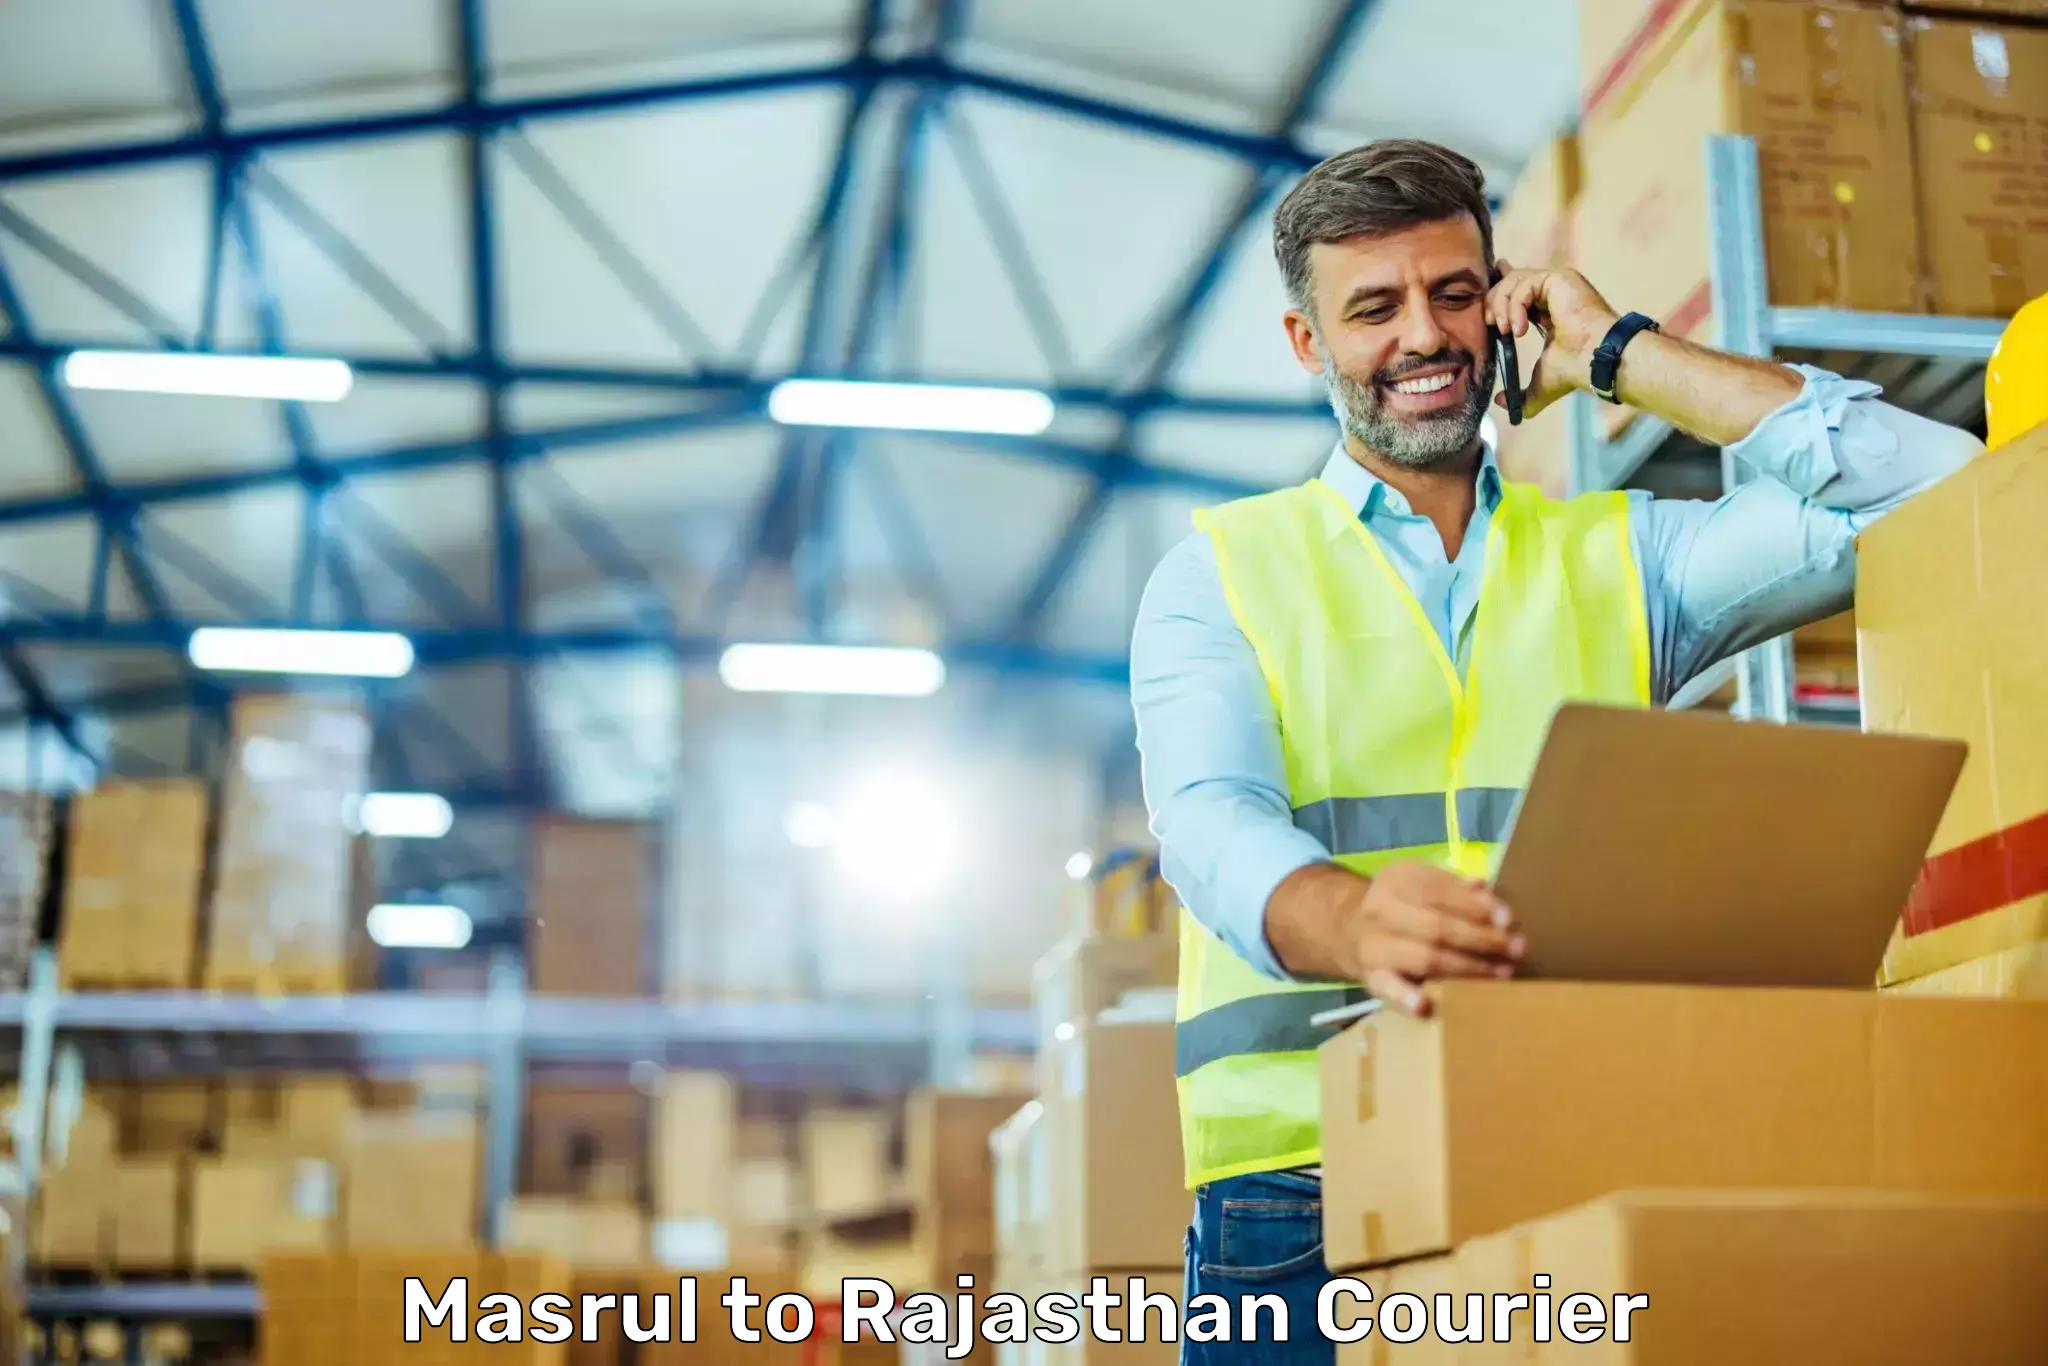 On-call courier service Masrul to Chhabra